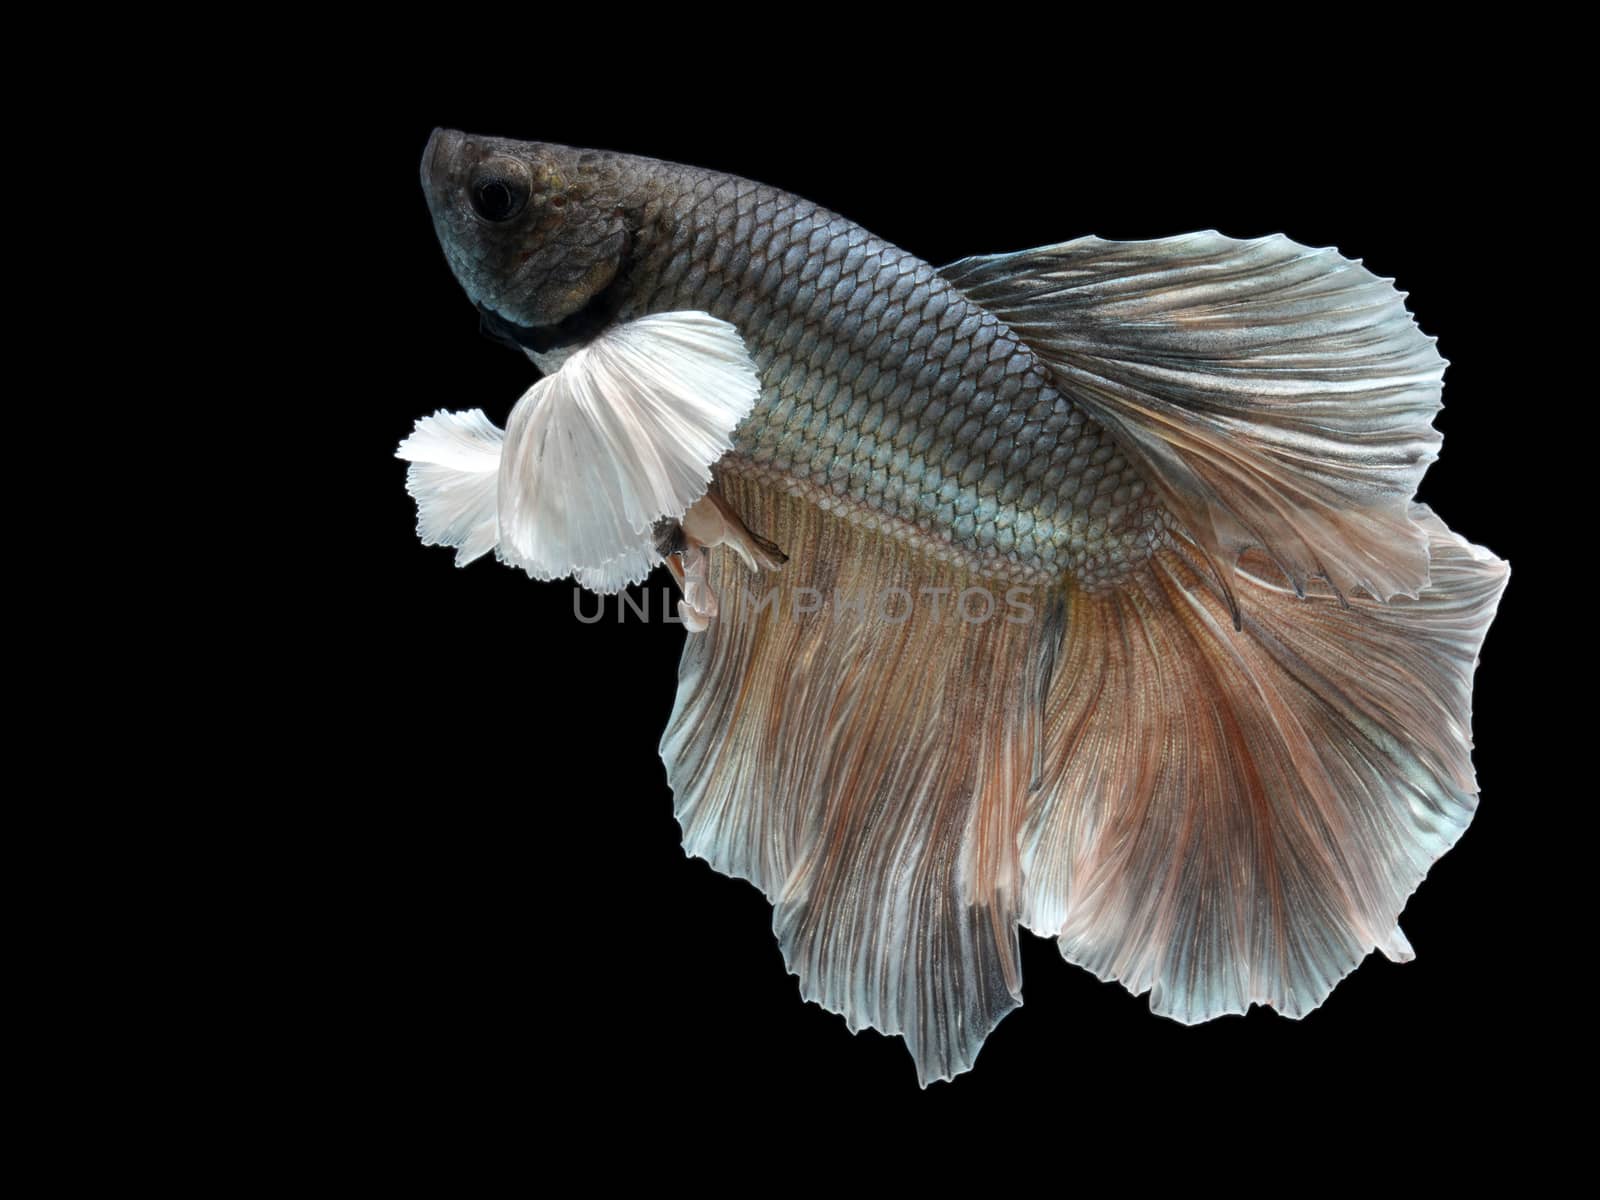 Siamese fighting fish on black background.  by chadchai_k